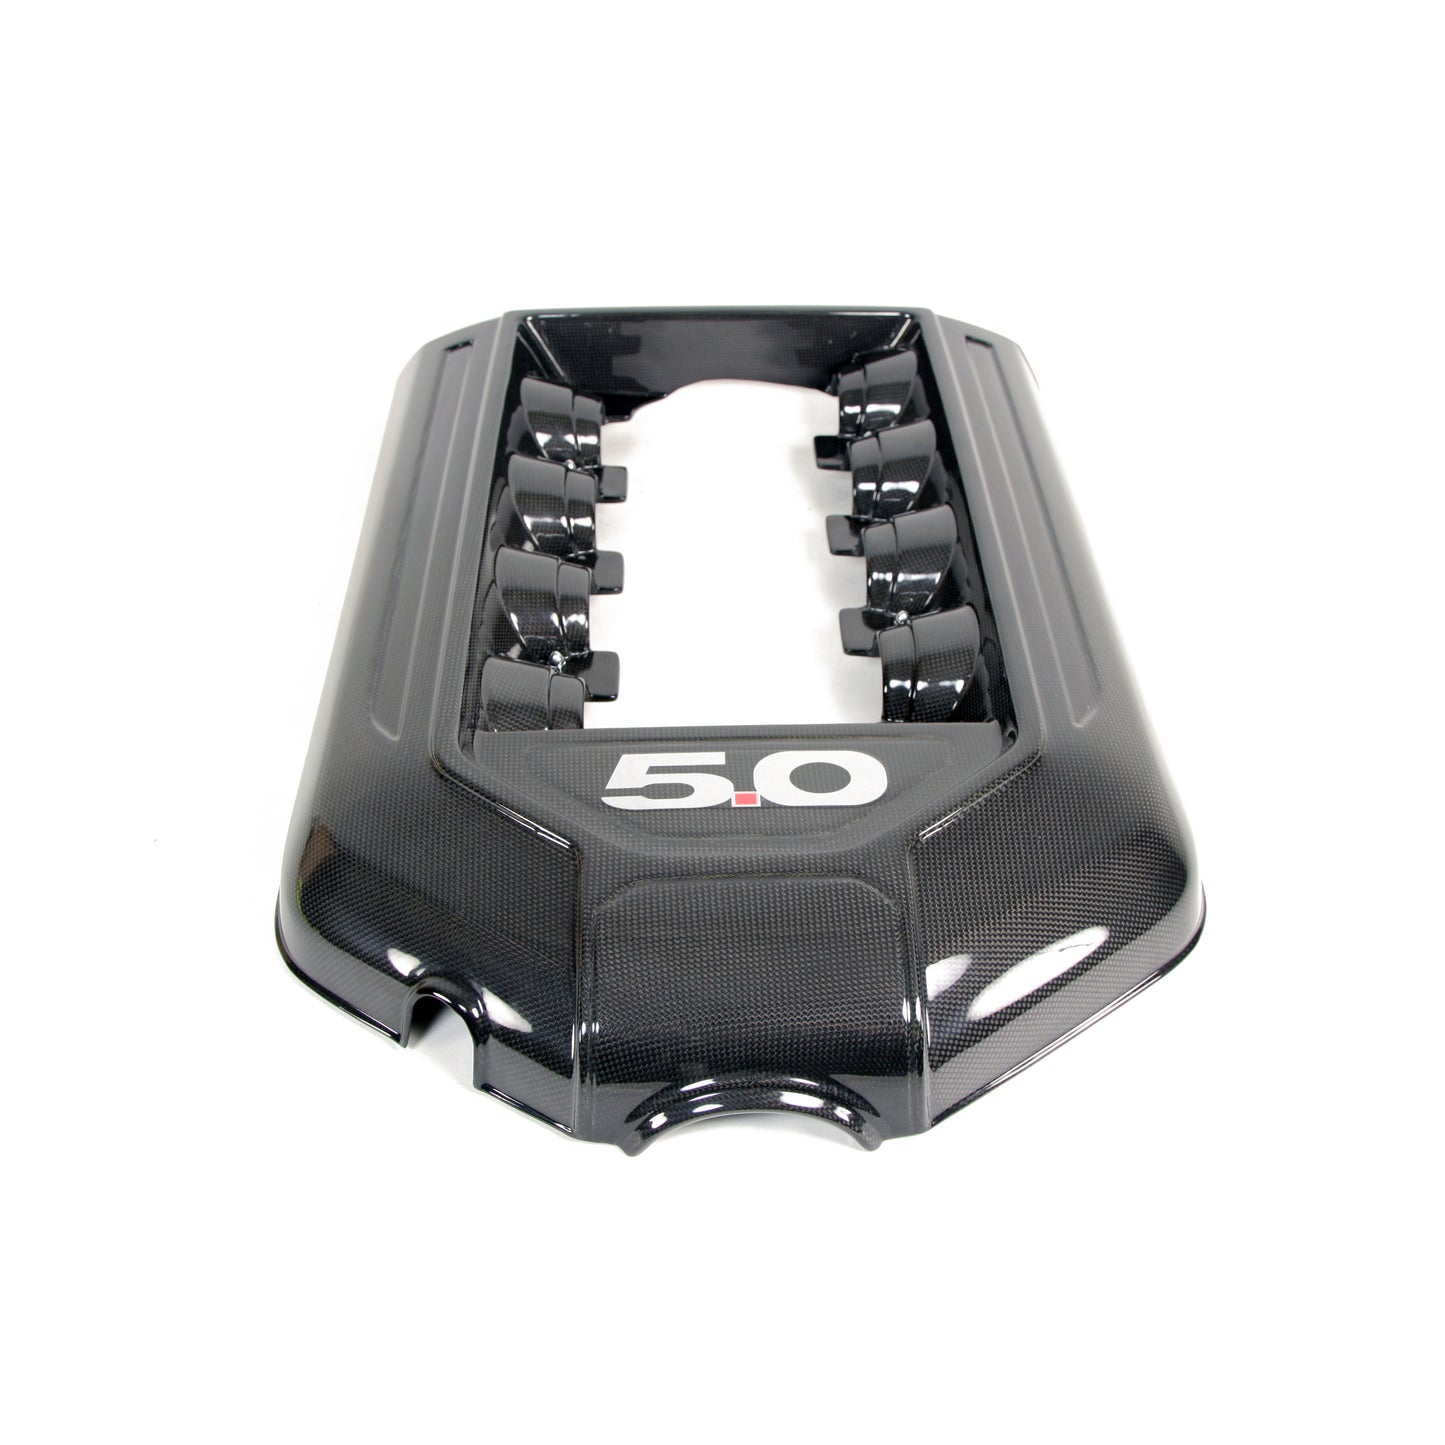 Ford Mustang GT 5.0 Engine Cover 2011-2014 (Manual Trans.)